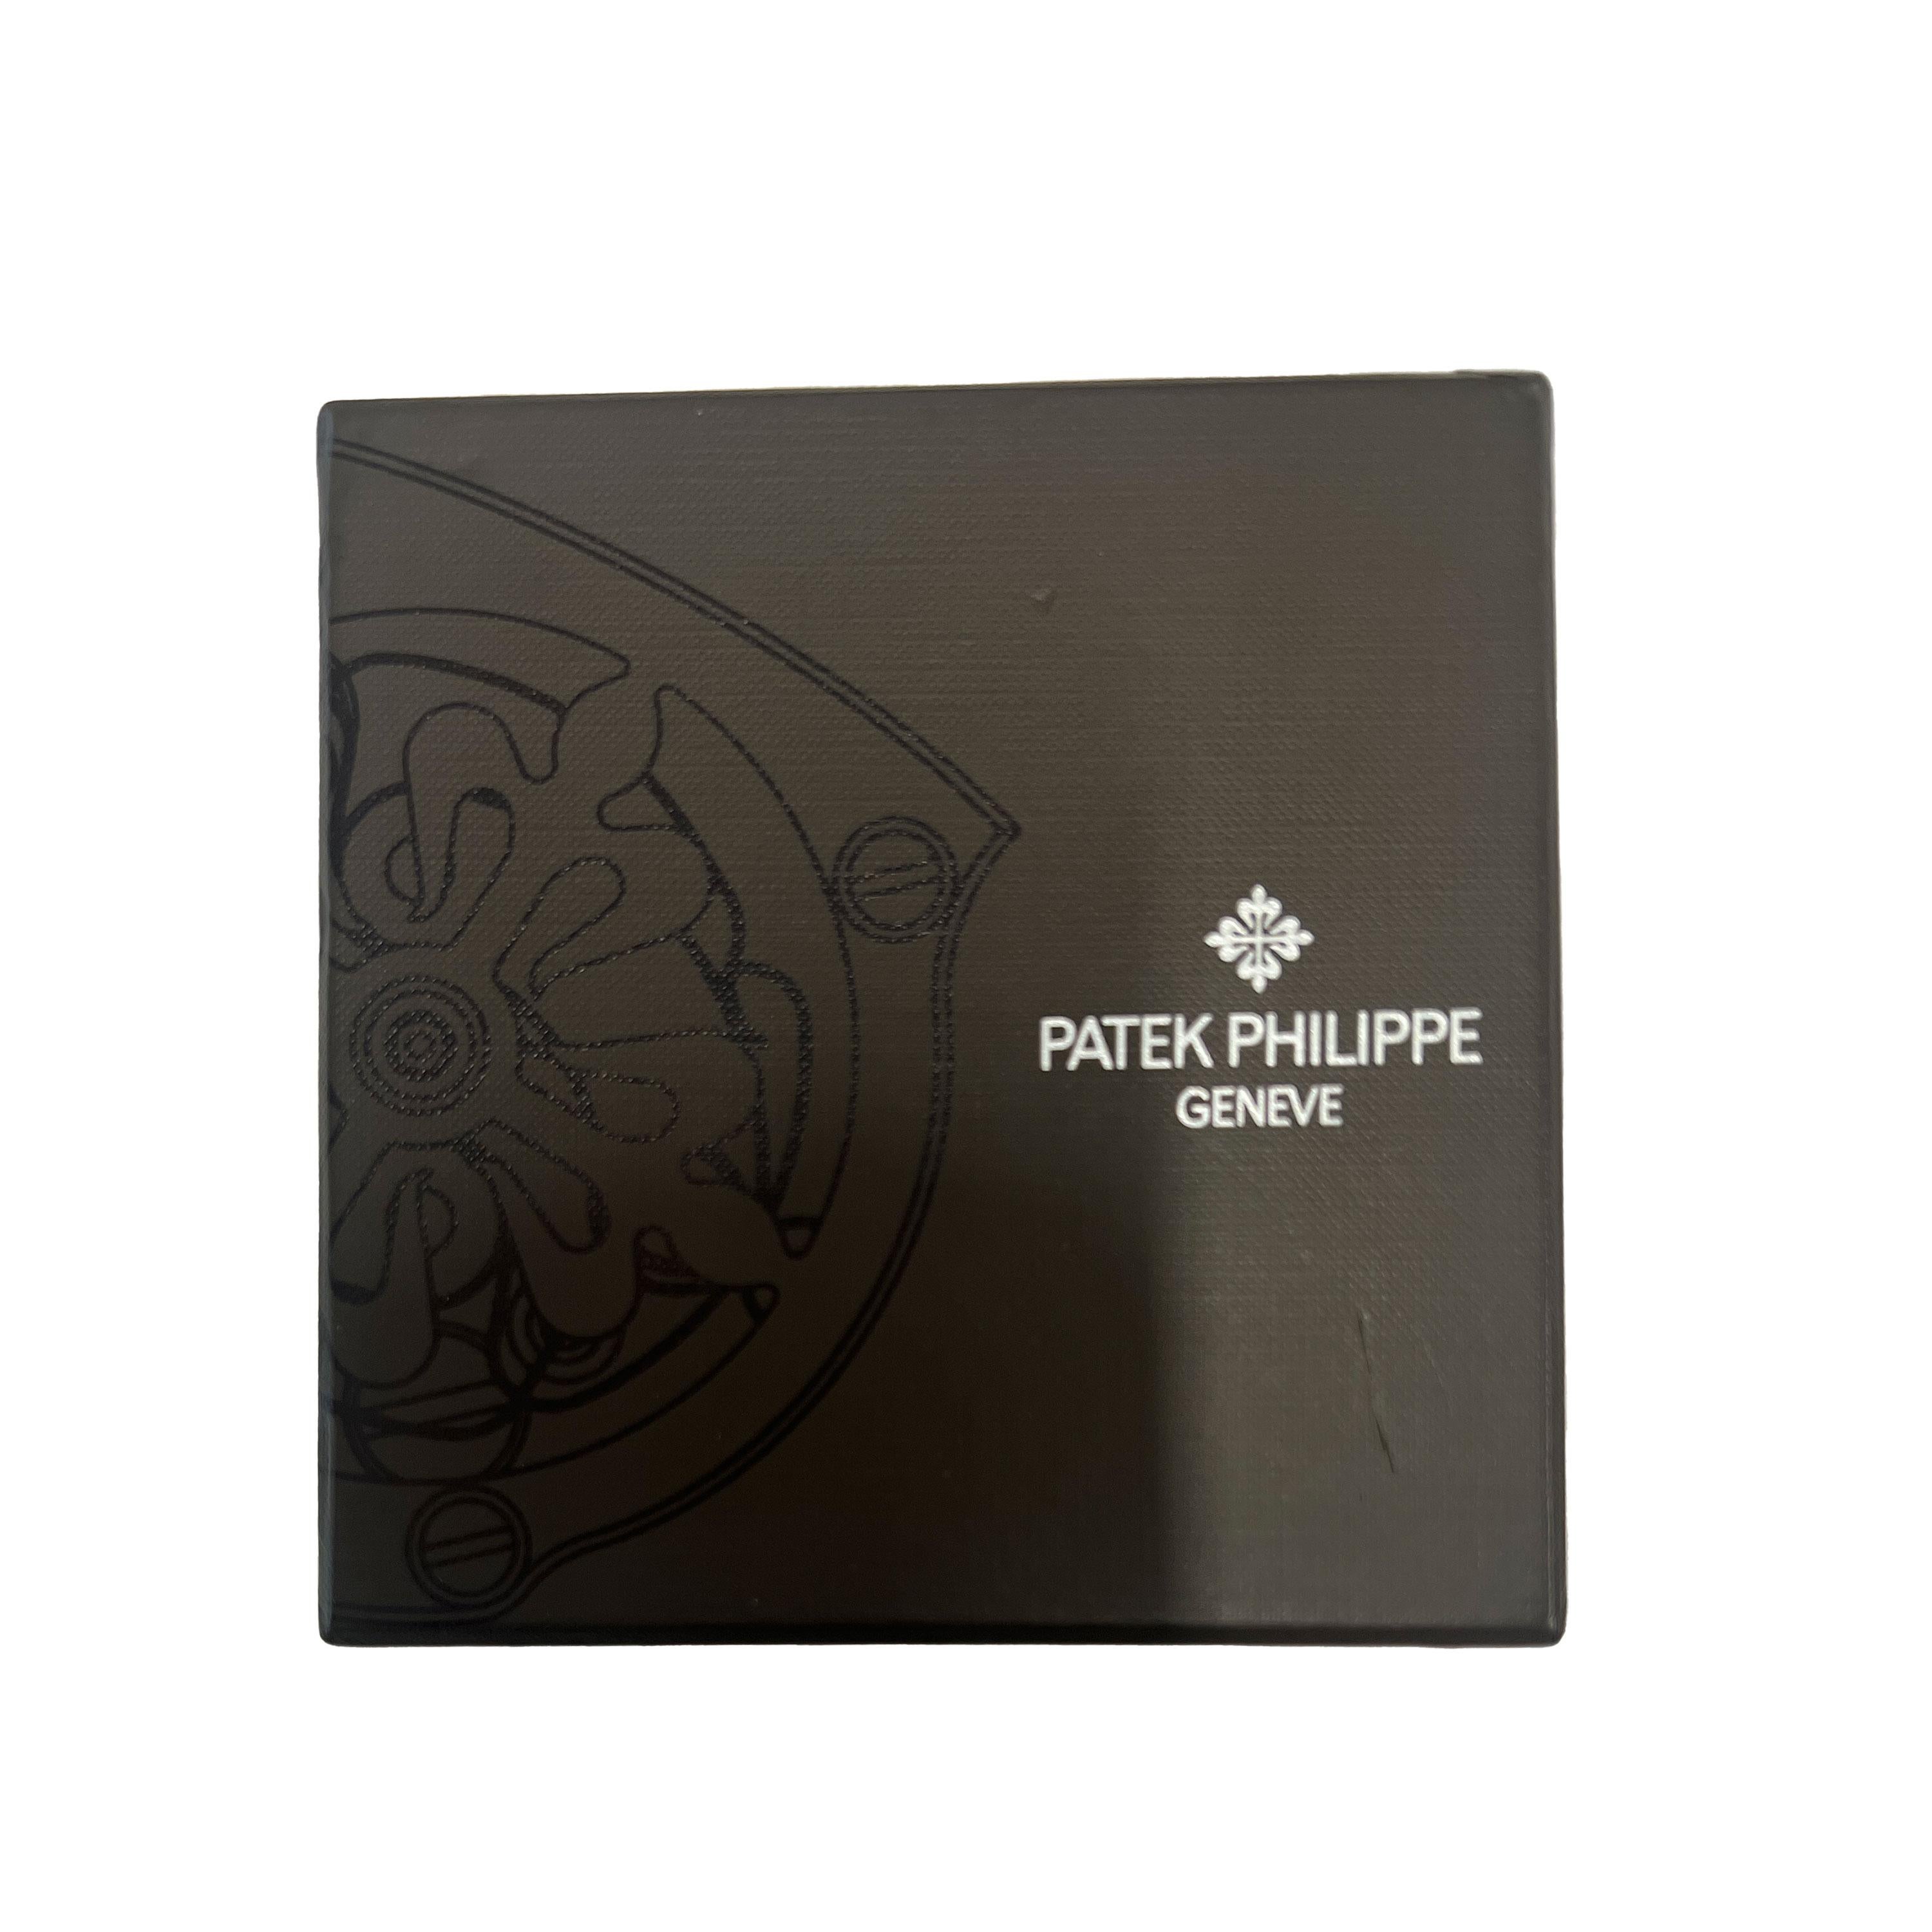 Patek Philippe Calatrava Onyx Cufflinks in 18k Rose Gold

PRIMARY DETAILS
SKU: 132332
Listing Title: Patek Philippe Calatrava Onyx Cufflinks in 18k Rose Gold
Condition Description: Retails for 6390 USD. In excellent condition.  Comes with